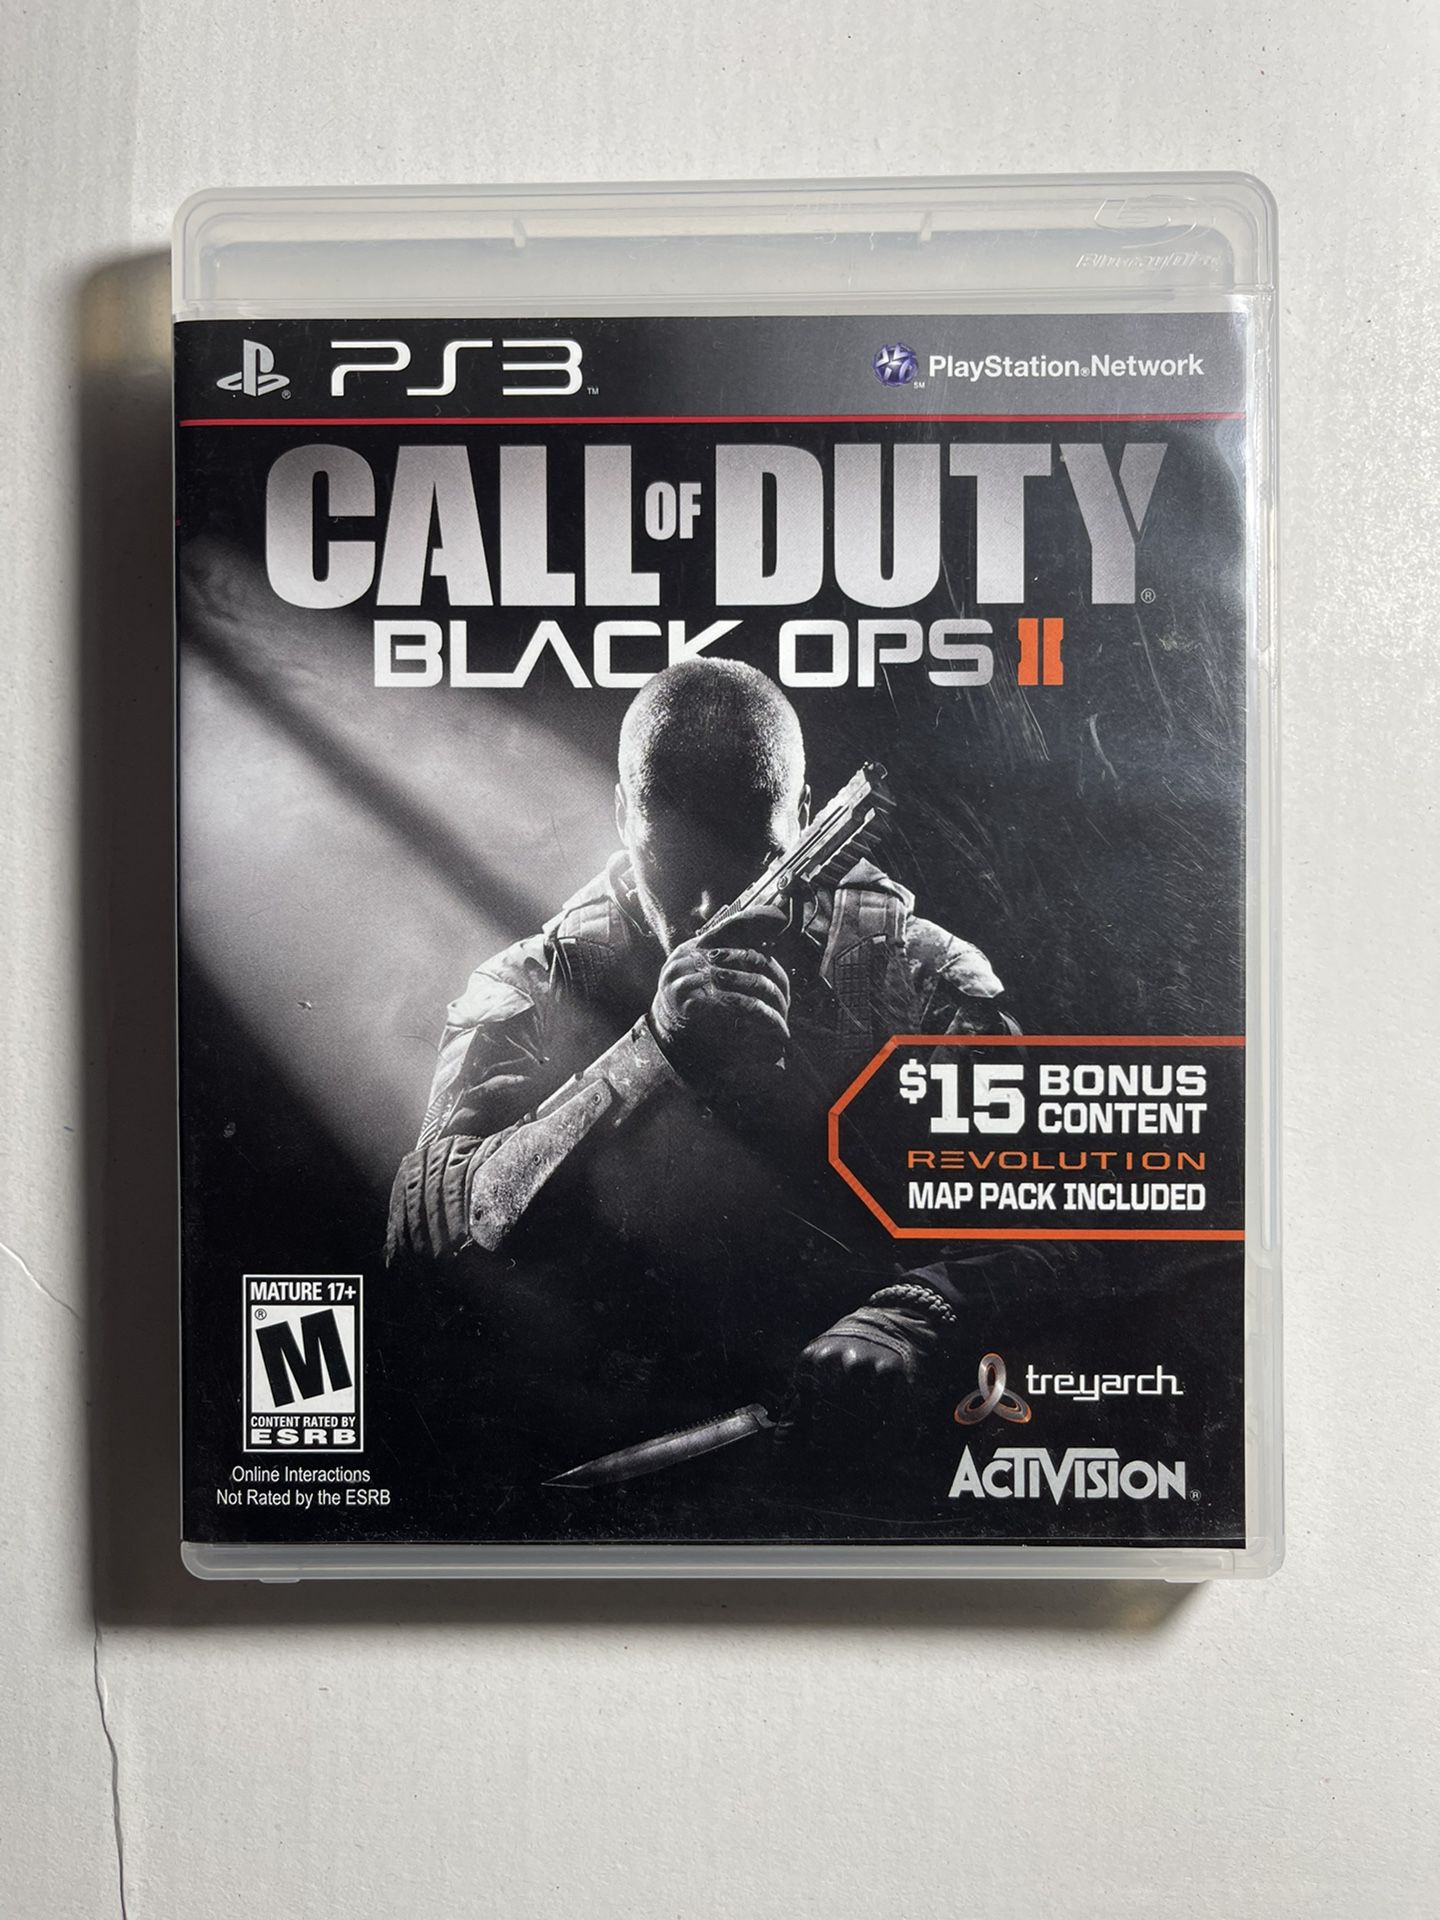 Black Ops 2 Game of the Year Edition PlayStation 3 Video Game CIB